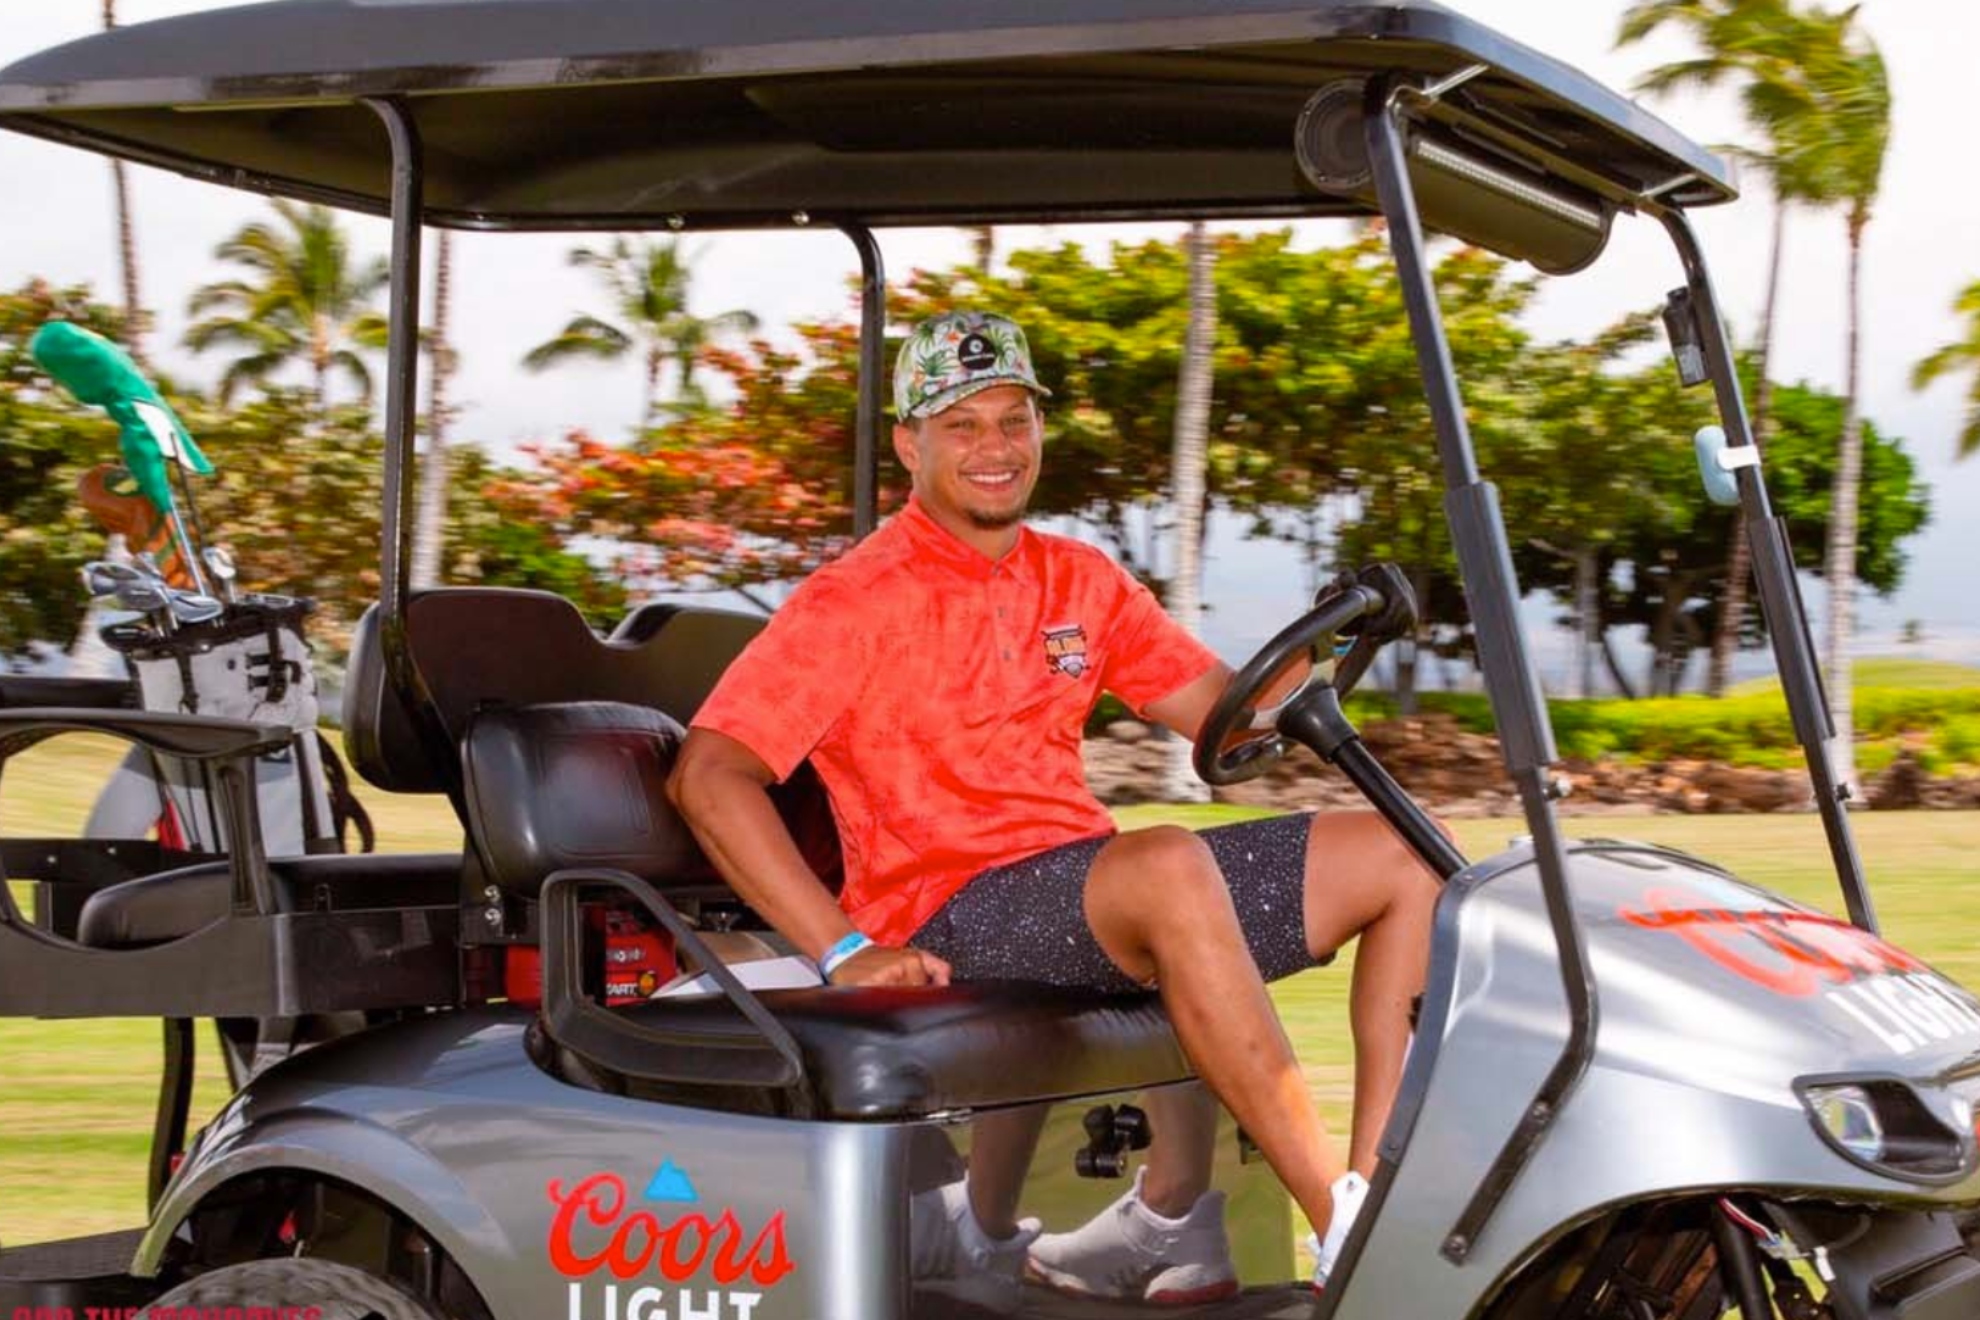 Don't miss your shot! Join Patrick Mahomes in Hawaii for a once-in-a-lifetime golf adventure